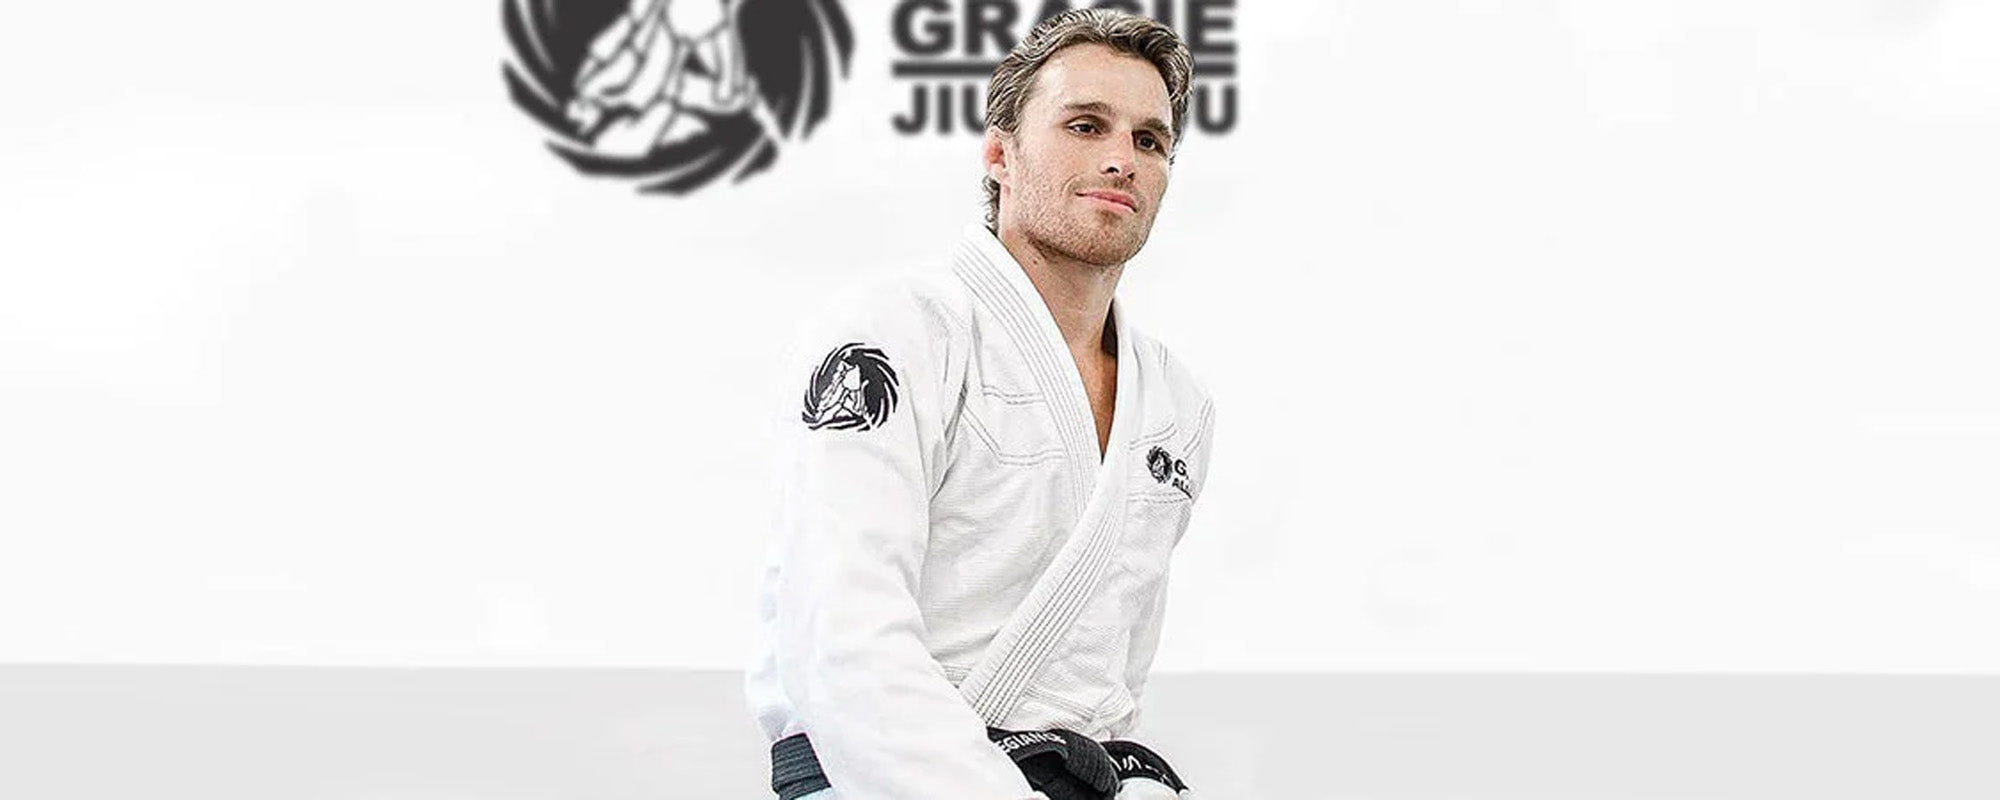 Clark Gracie - The Gracie Allegiance Coach, and The Omoplata King